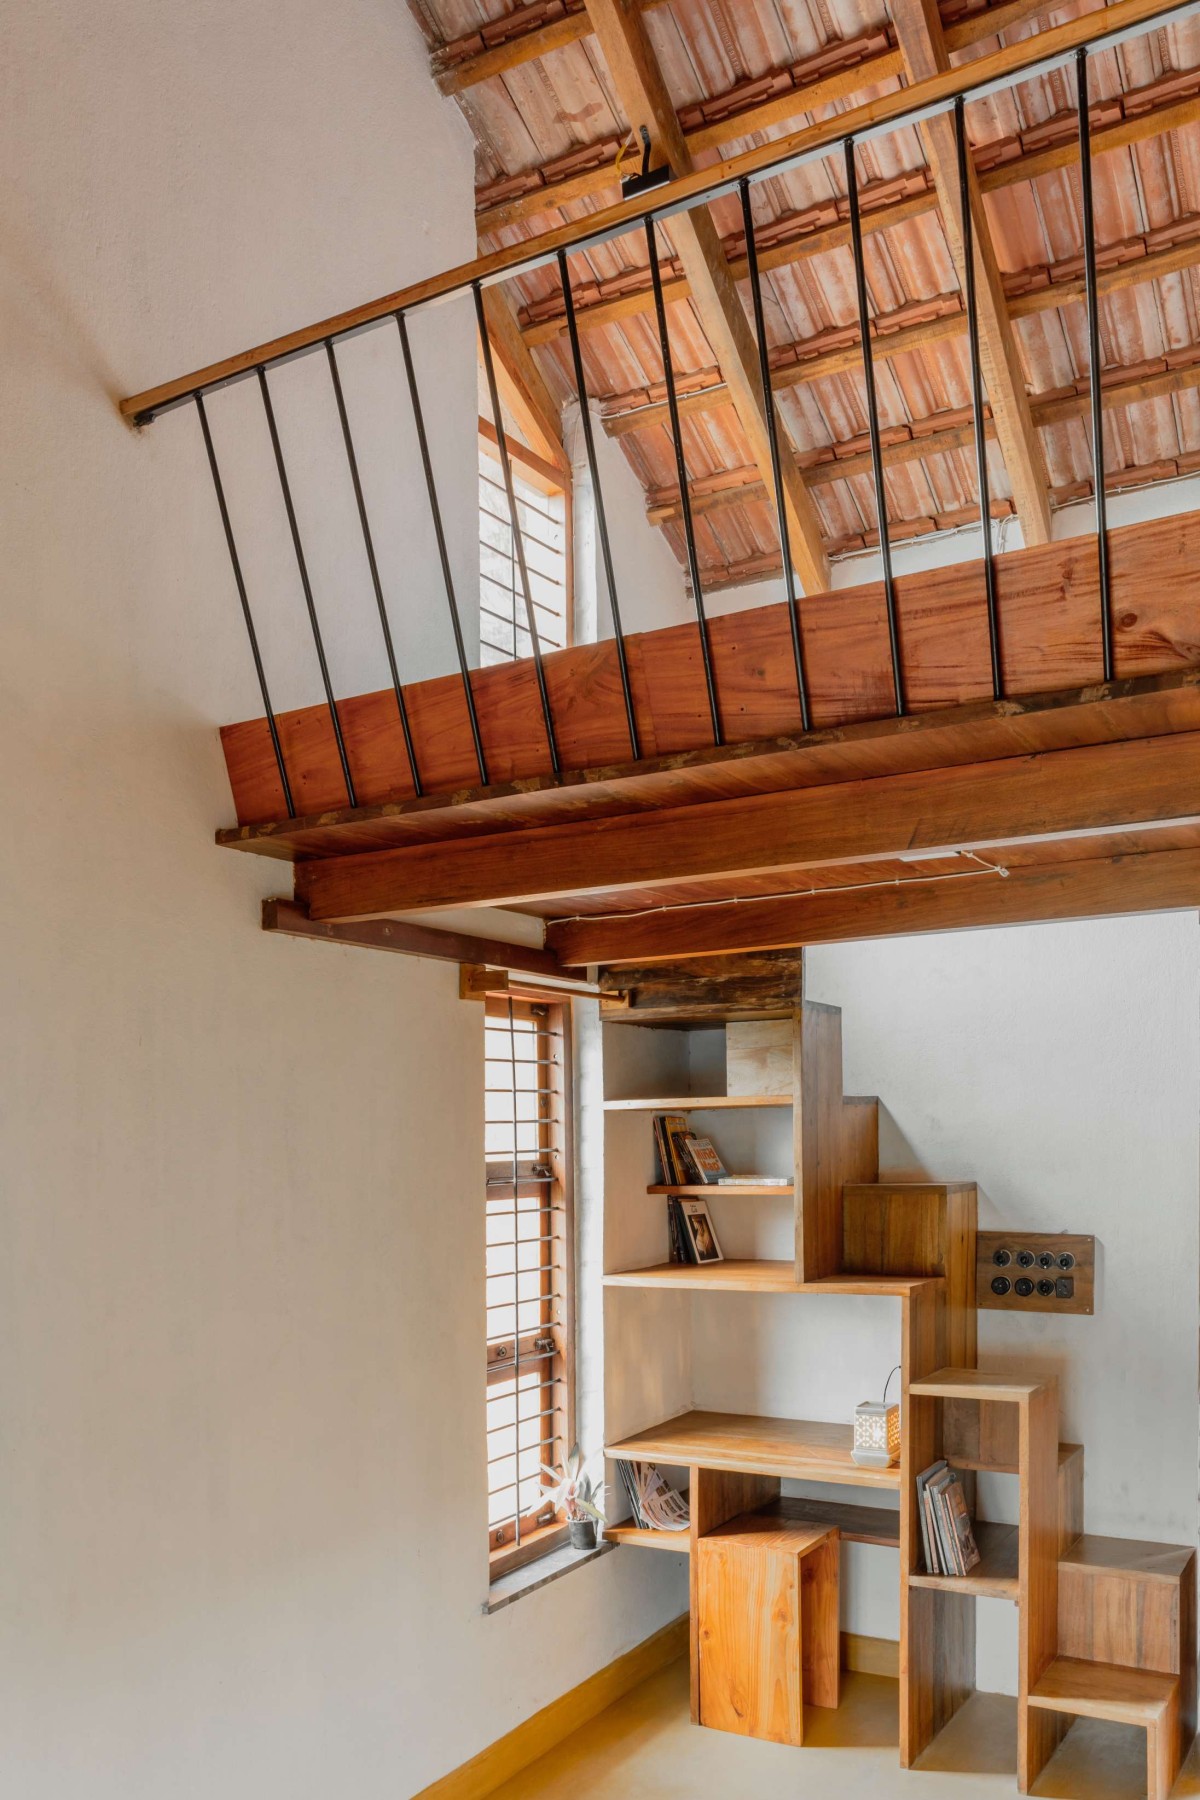 Staircase and Bookshelf of Brick Manor by Bhutha Earthen Architecture Studio